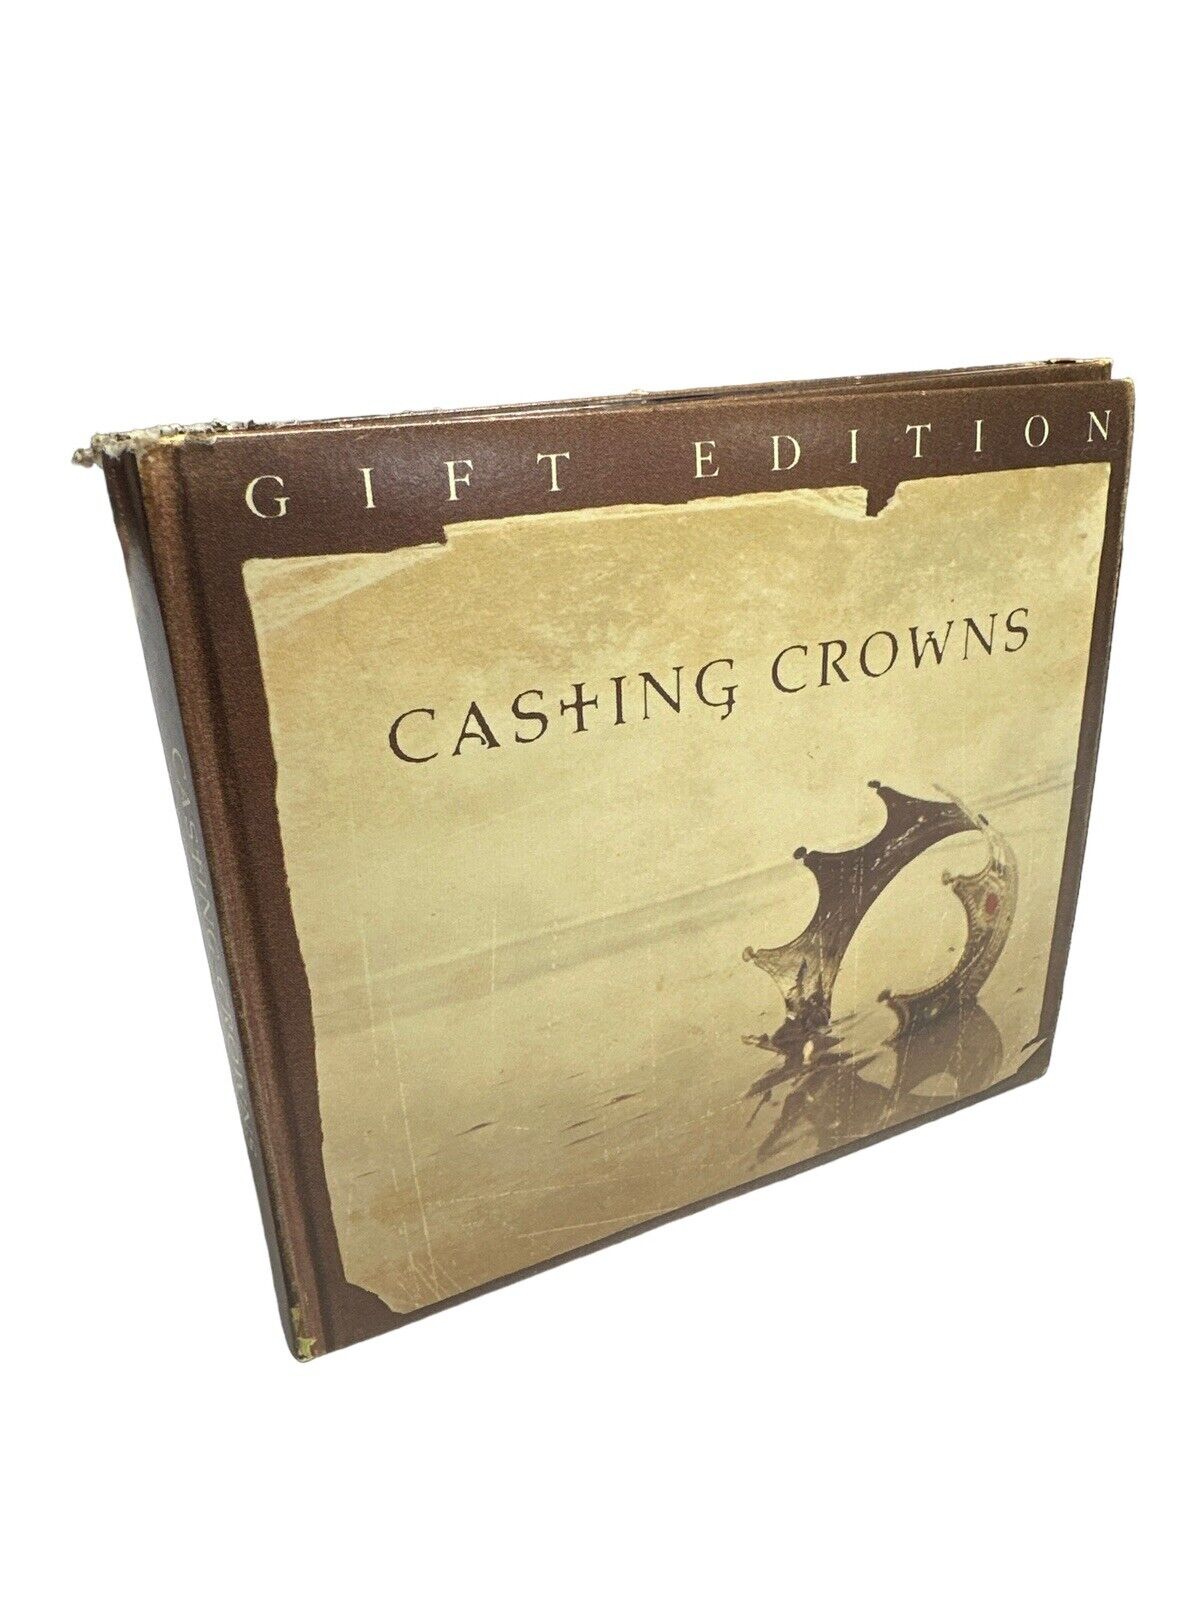 Gift Edition [Limited] by Casting Crowns (CD, Mar-2007, 2 Discs, Provident)